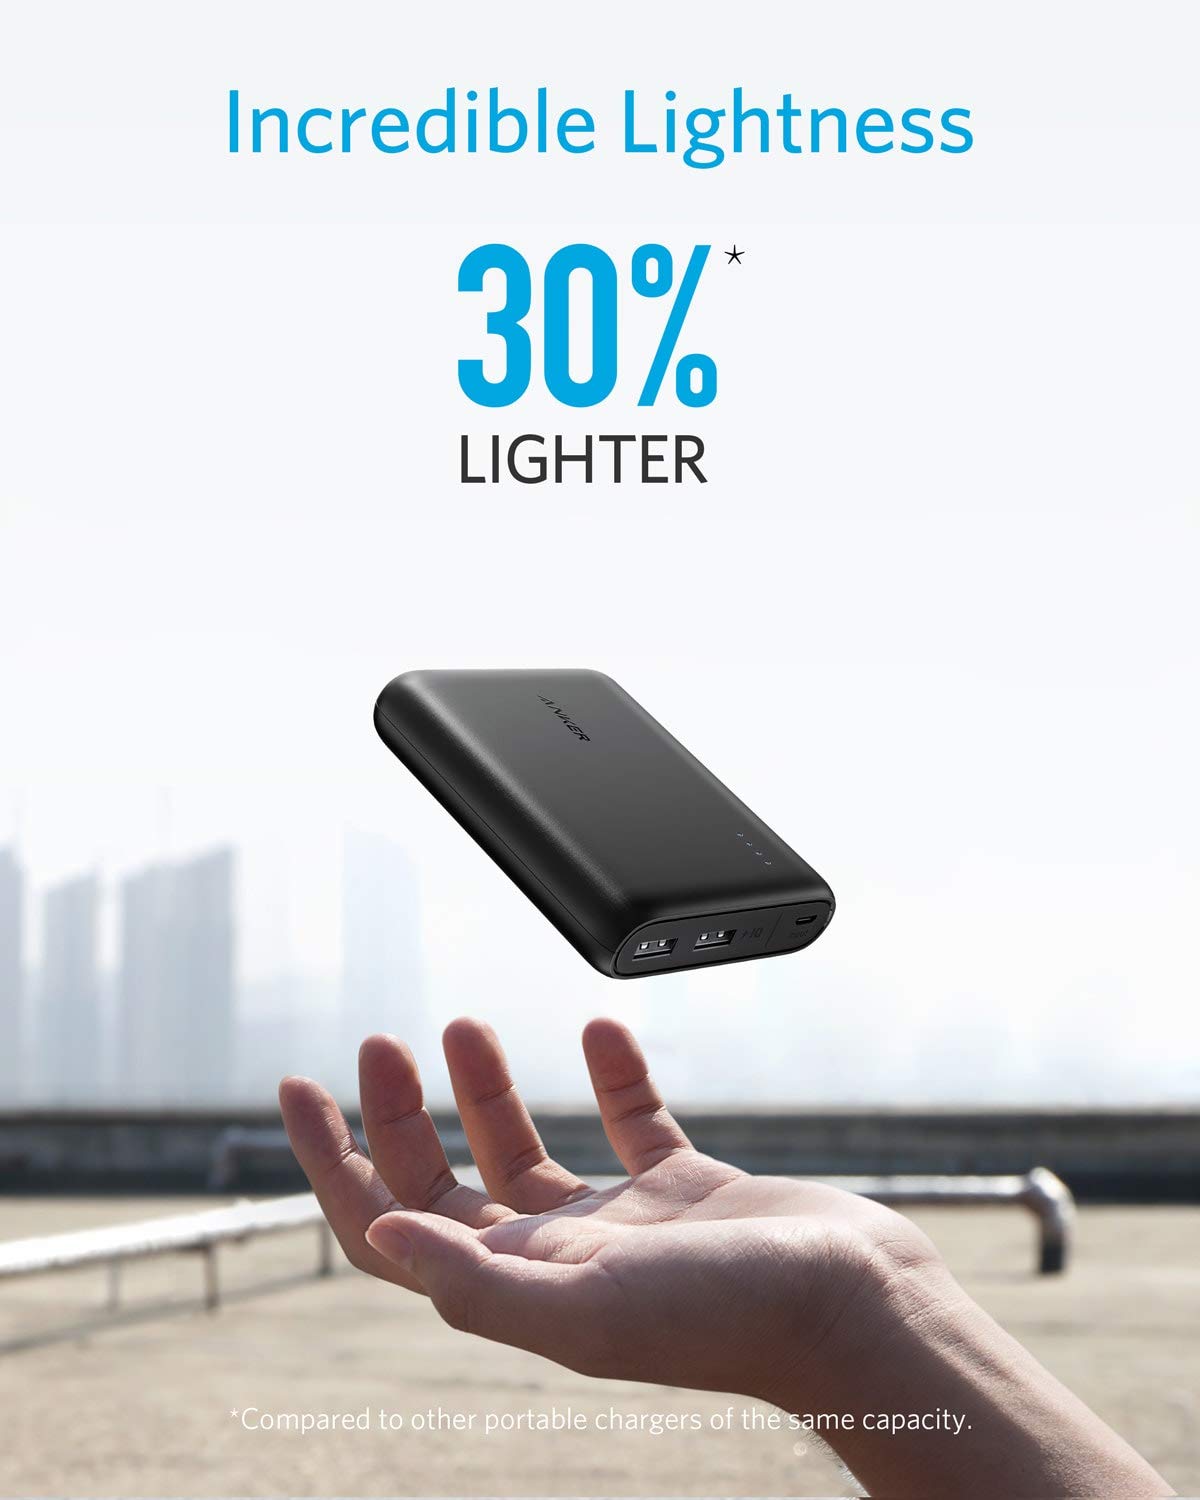 Anker PowerCore 13000 Power Bank - Compact 13000mAh 2-Port Ultra Portable Phone Charger with PowerIQ and VoltageBoost Technology for New Airpods, iPhone X/ 8/ 8 Plus, iPad, Samsung Galaxy